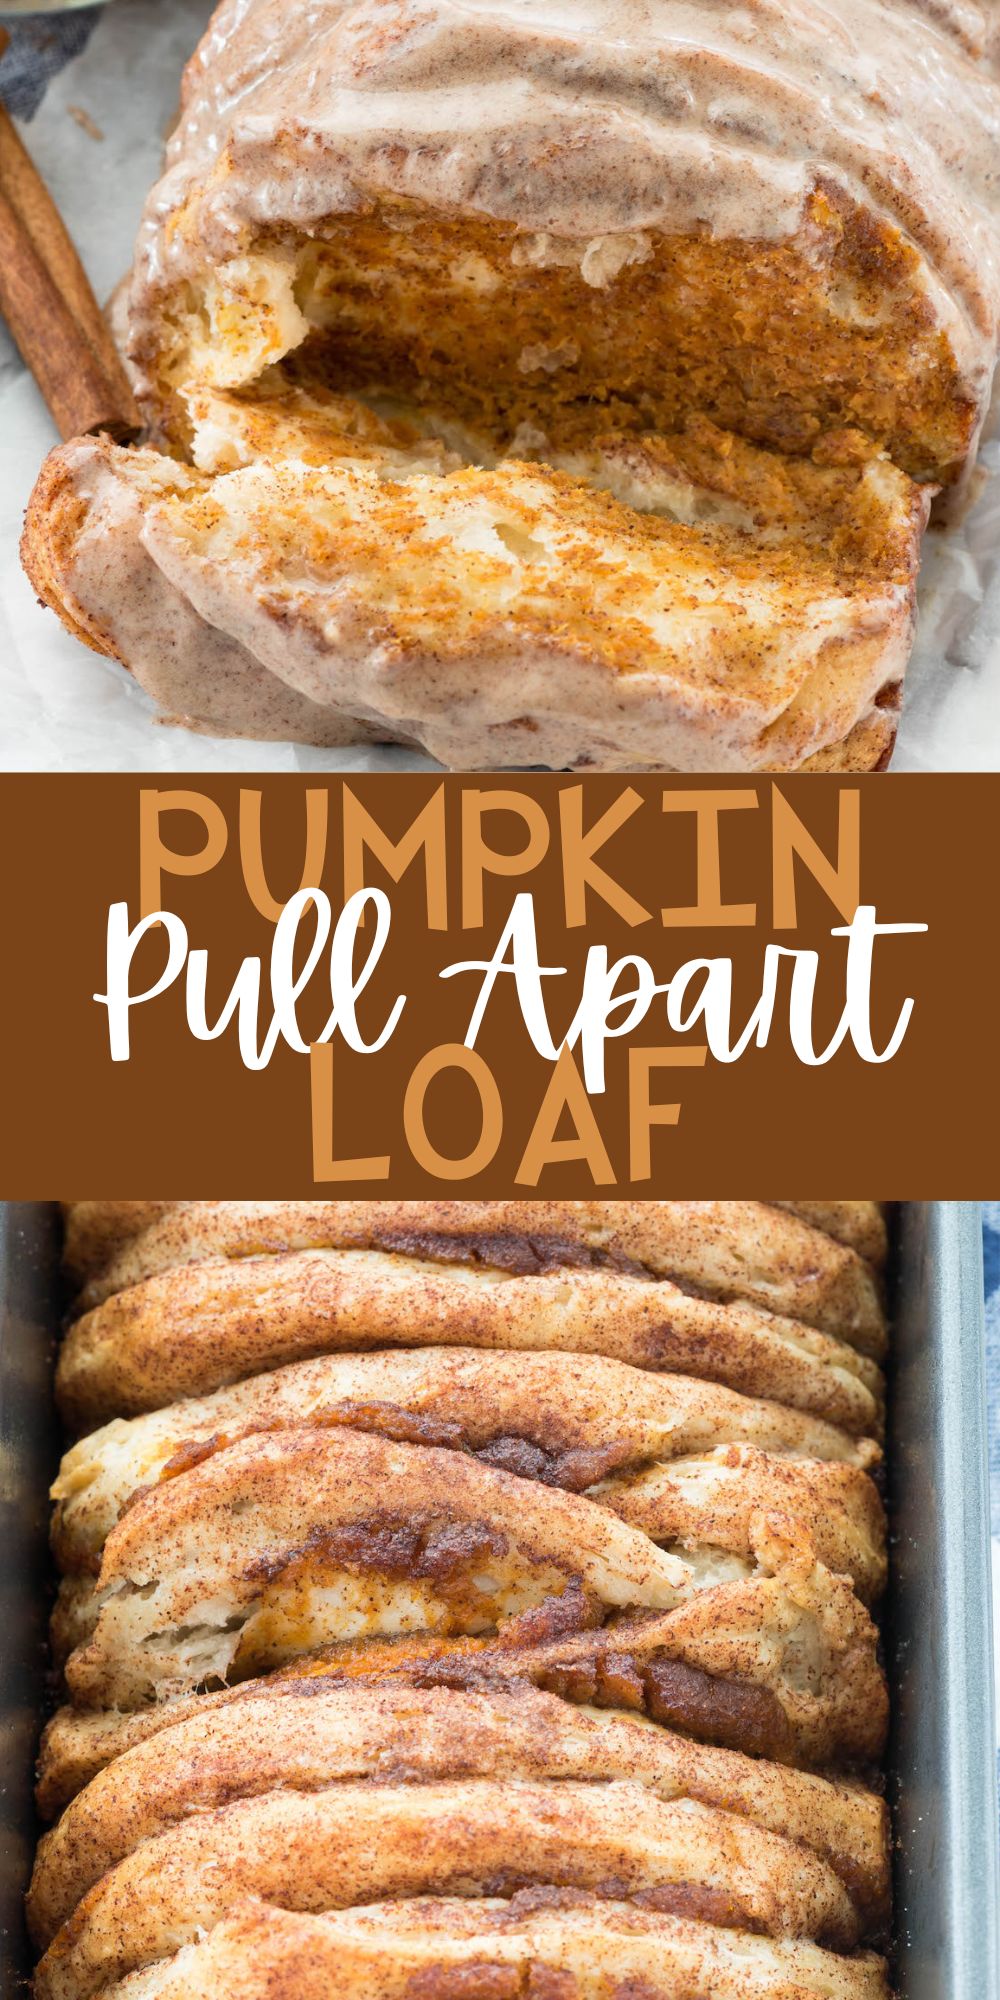 two photos of pumpkin pull apart loaf that sliced in front with words on the image.